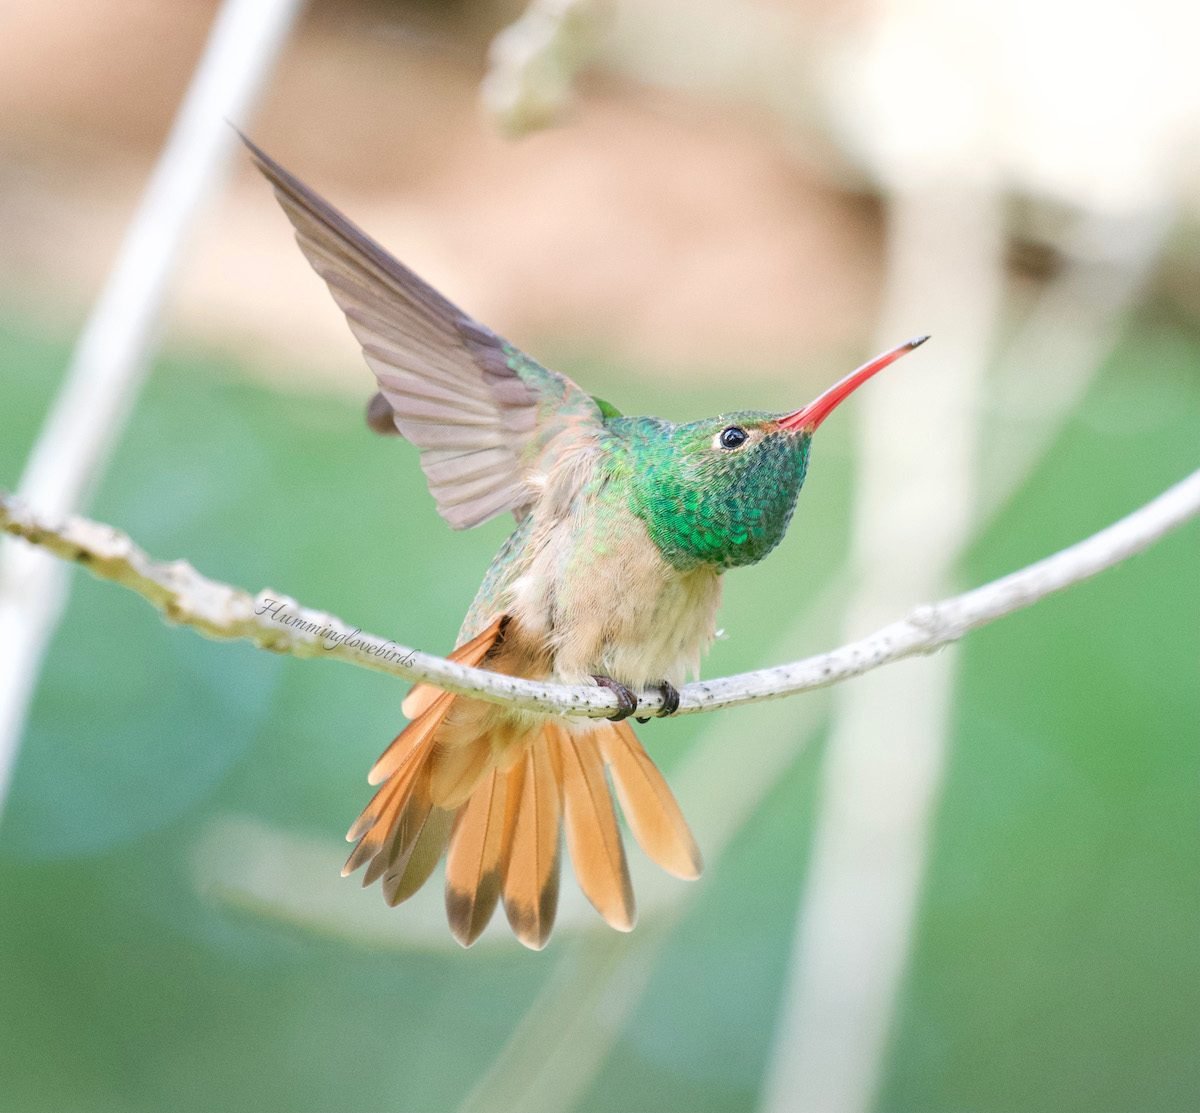 Meet the Brilliantly Colored Buff-Bellied Hummingbird